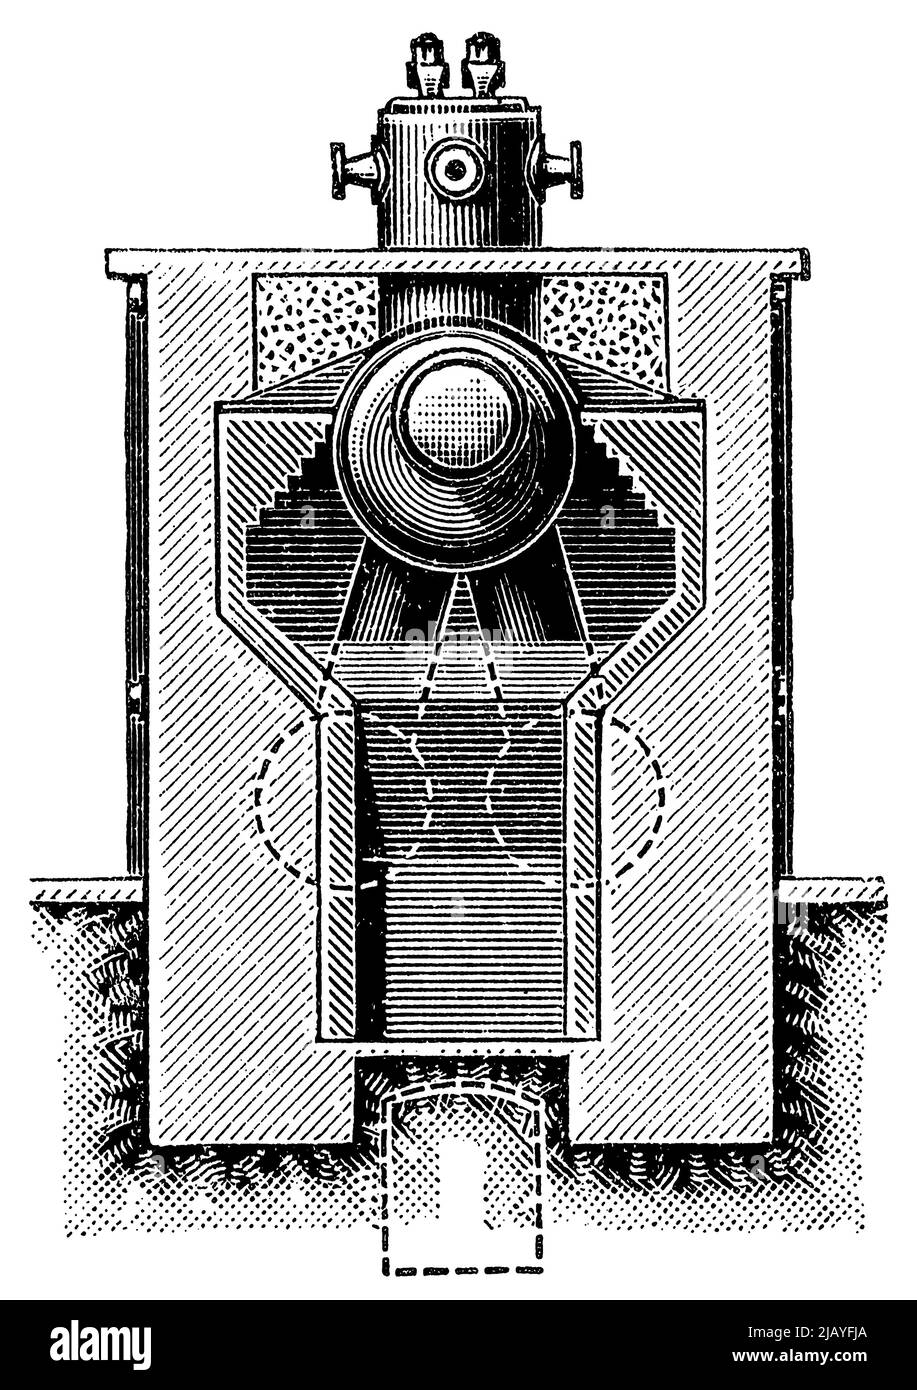 Multiple cylinder boiler (roller boiler) with intermediate firing,  sectional view. Publication of the book "Meyers Konversations-Lexikon",  Volume 2, Leipzig, Germany, 1910 Stock Photo - Alamy